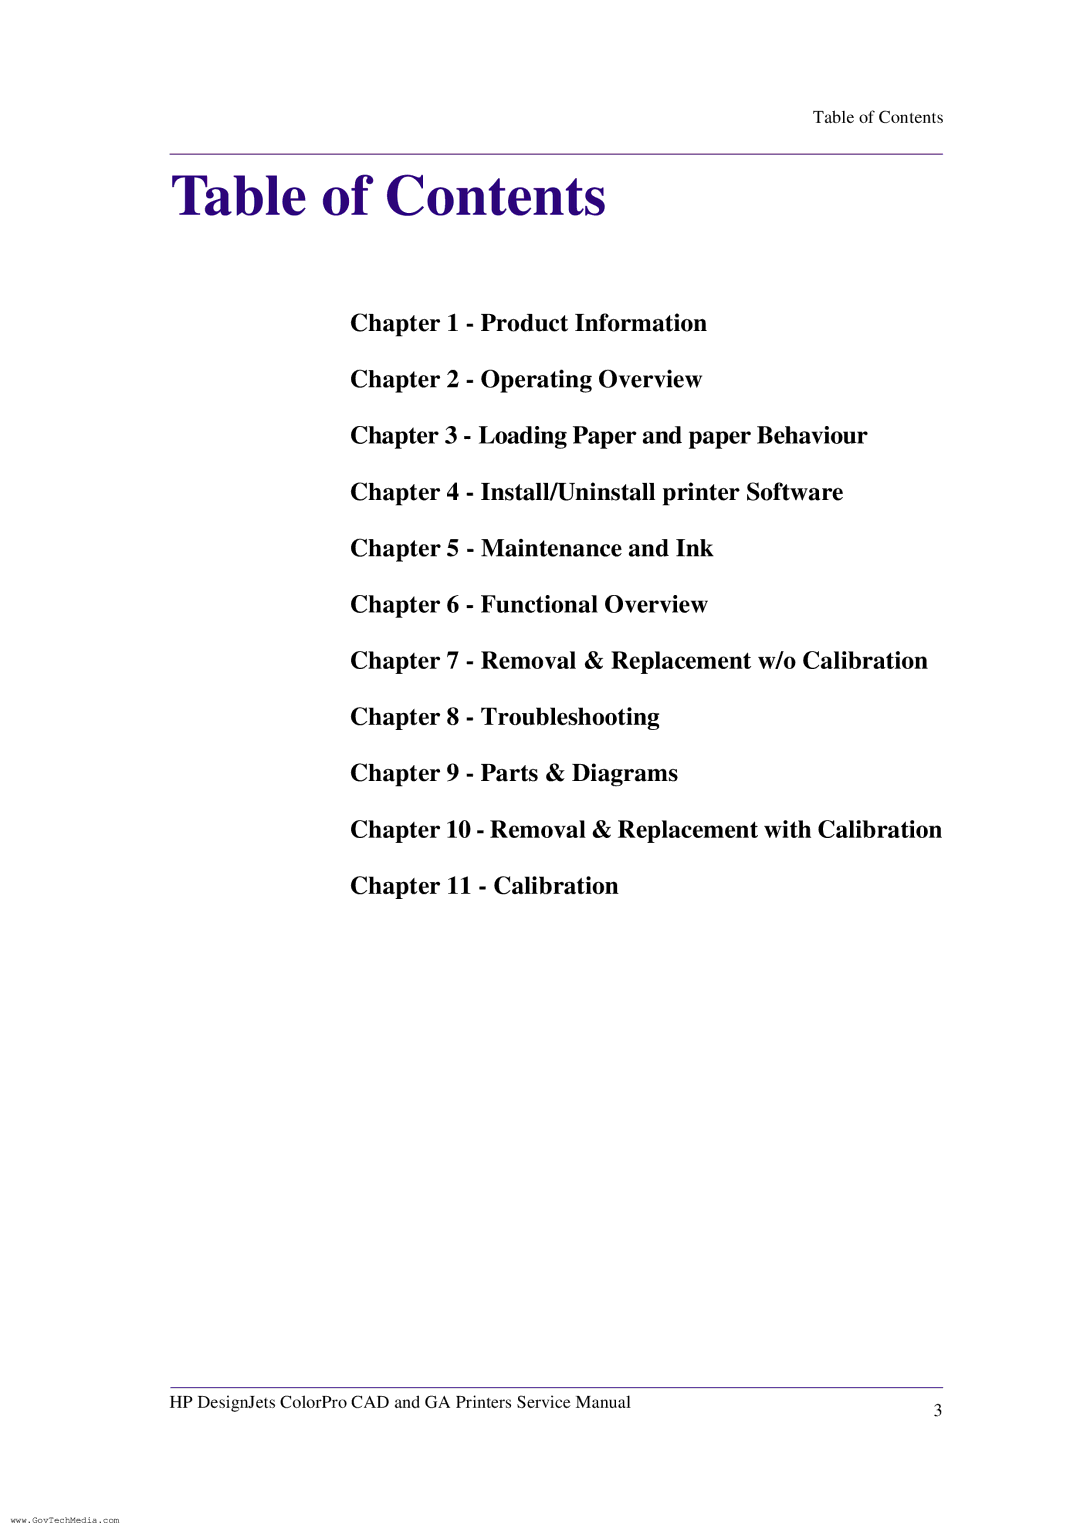 HP ColorPro CAD manual Table of Contents 